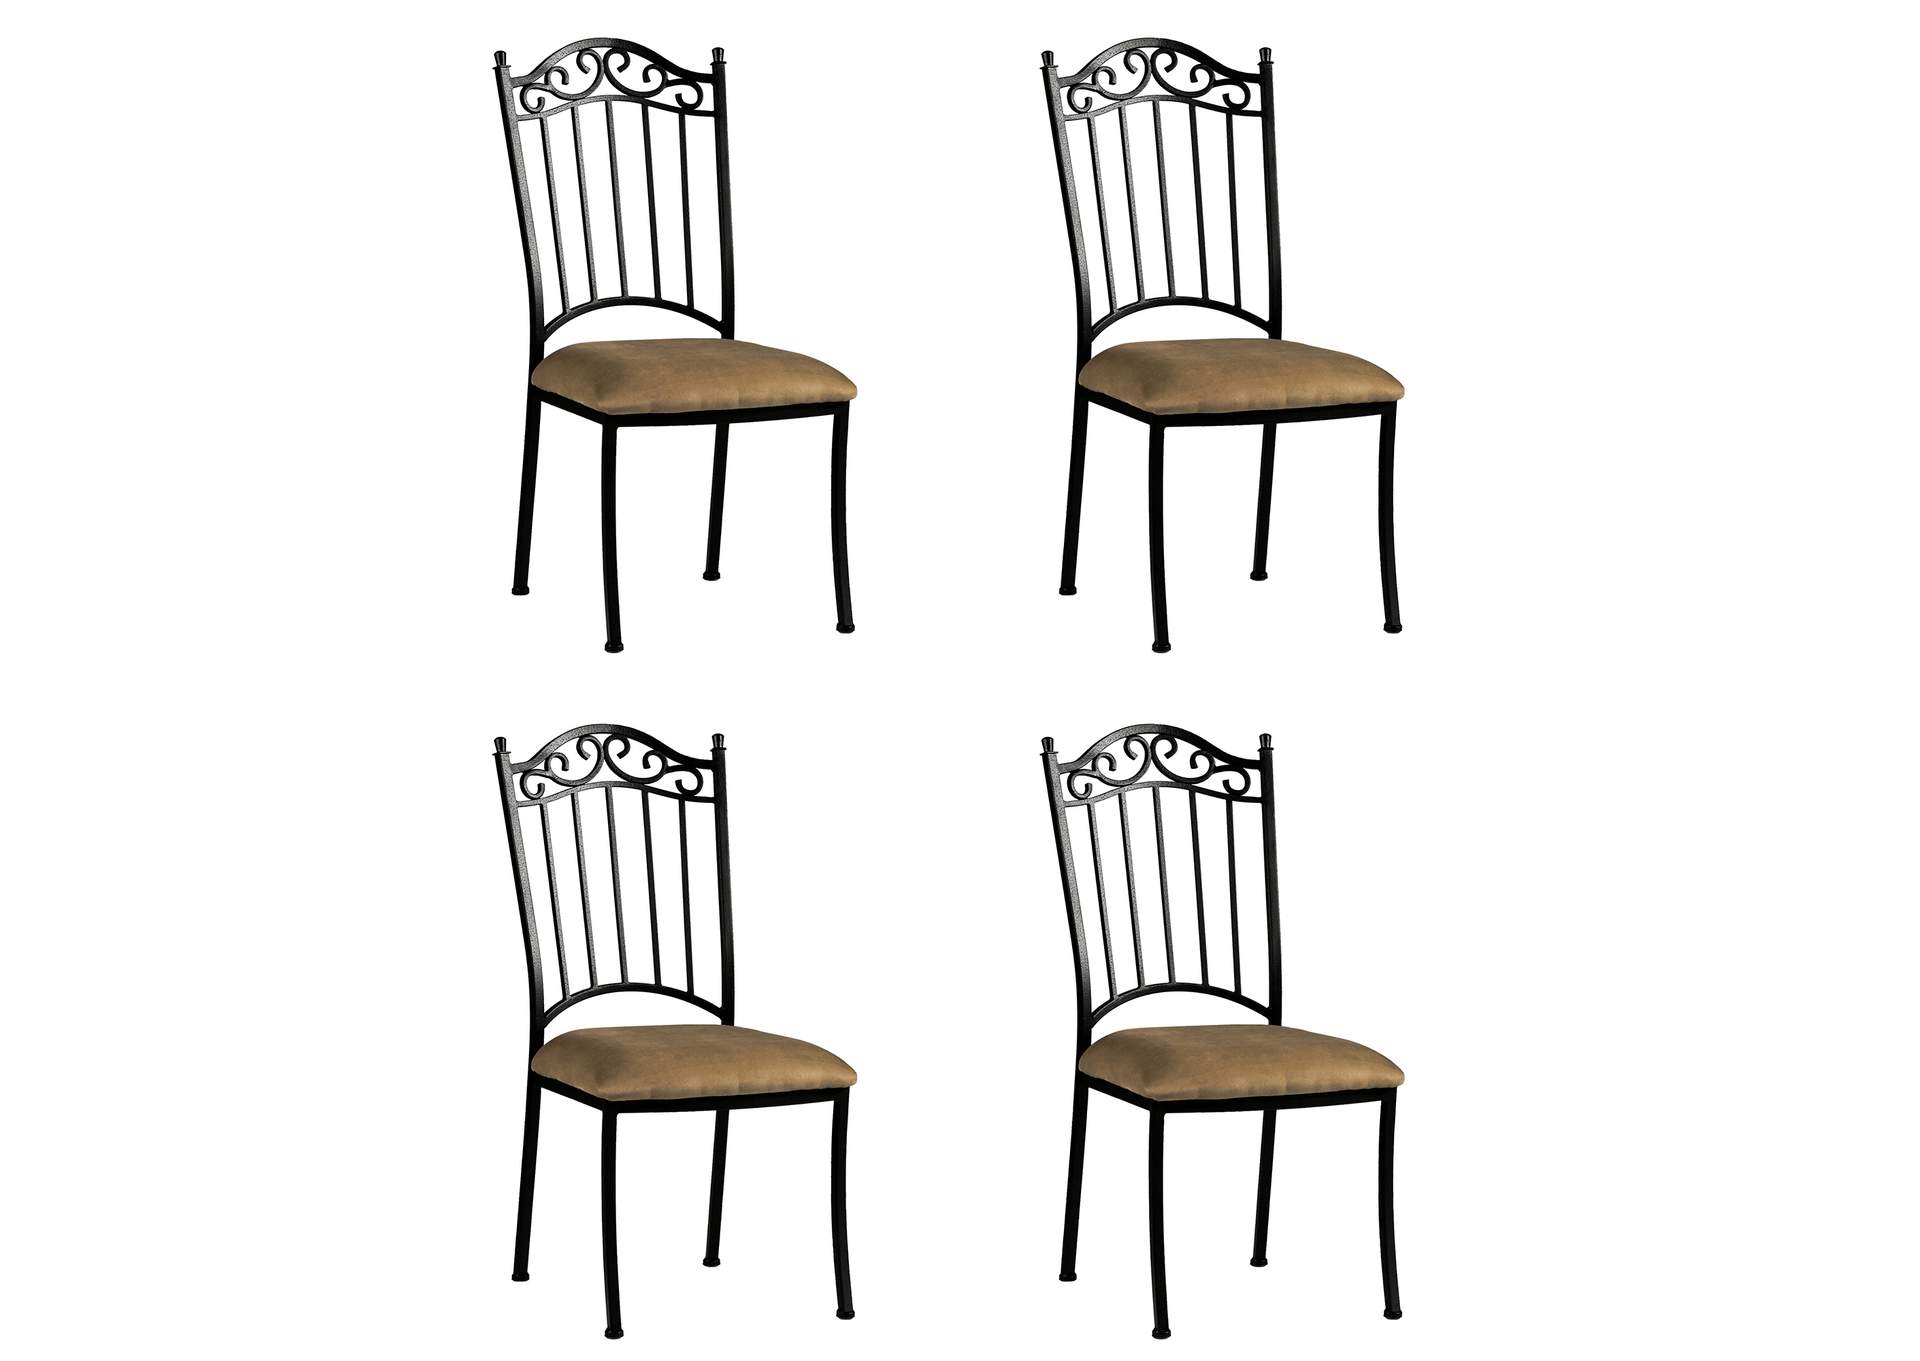 Transitional Style Dining Set with Wrought Iron Glass Table & Chairs,Chintaly Imports